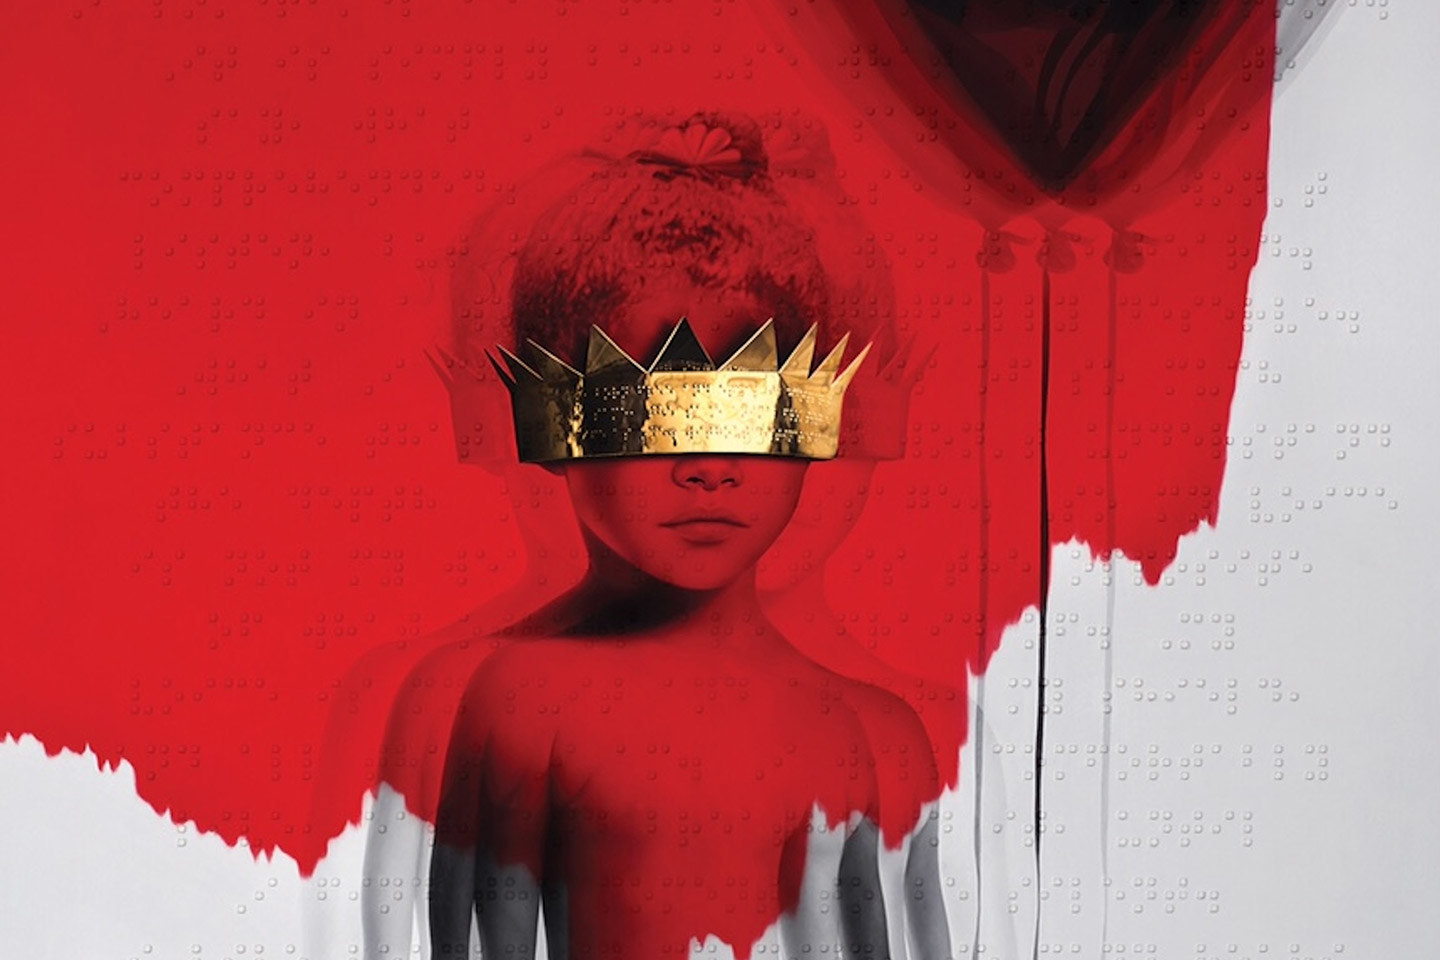 Part of the album artwork for Rihanna's new album, <i>Anti</i>, which is available now on Tidal.